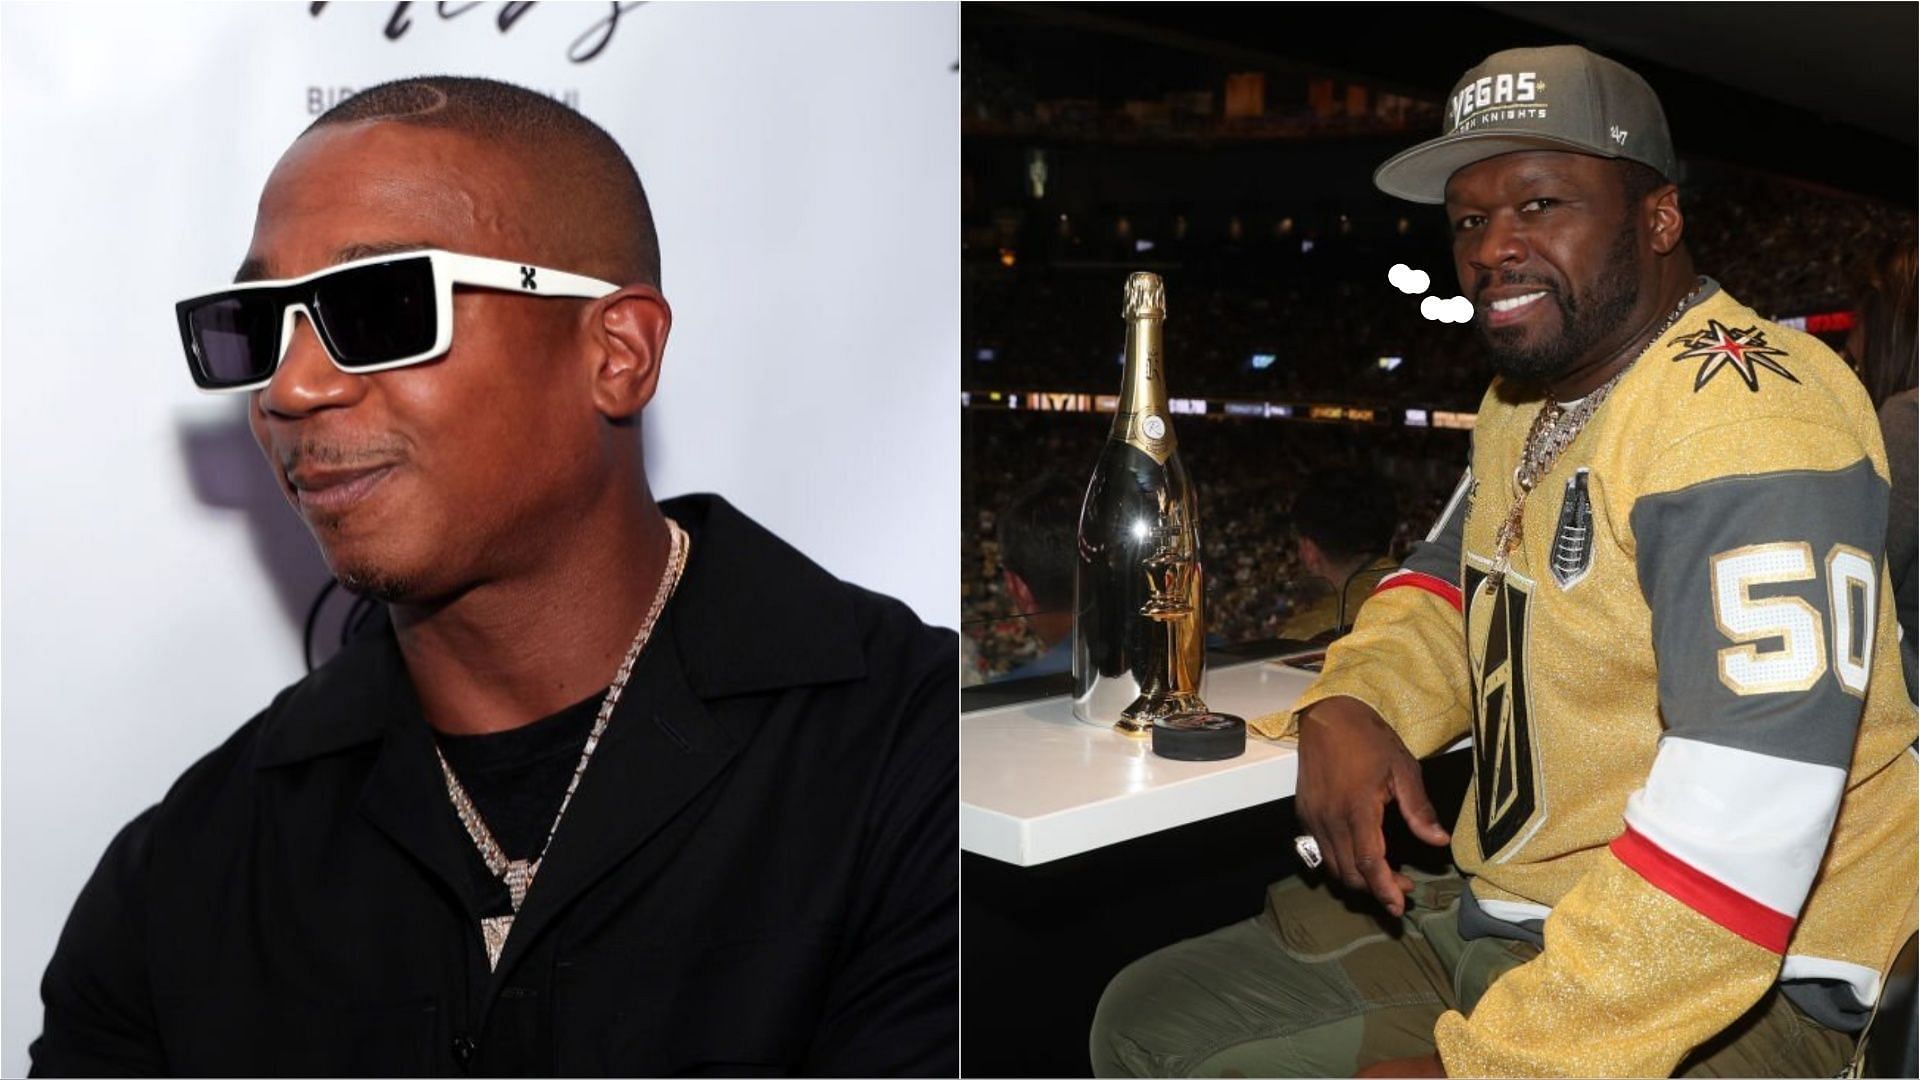 50 Cent and Ja Rule had another beef on social media (Images via John Lamparski and Zak Krill/Getty Images)